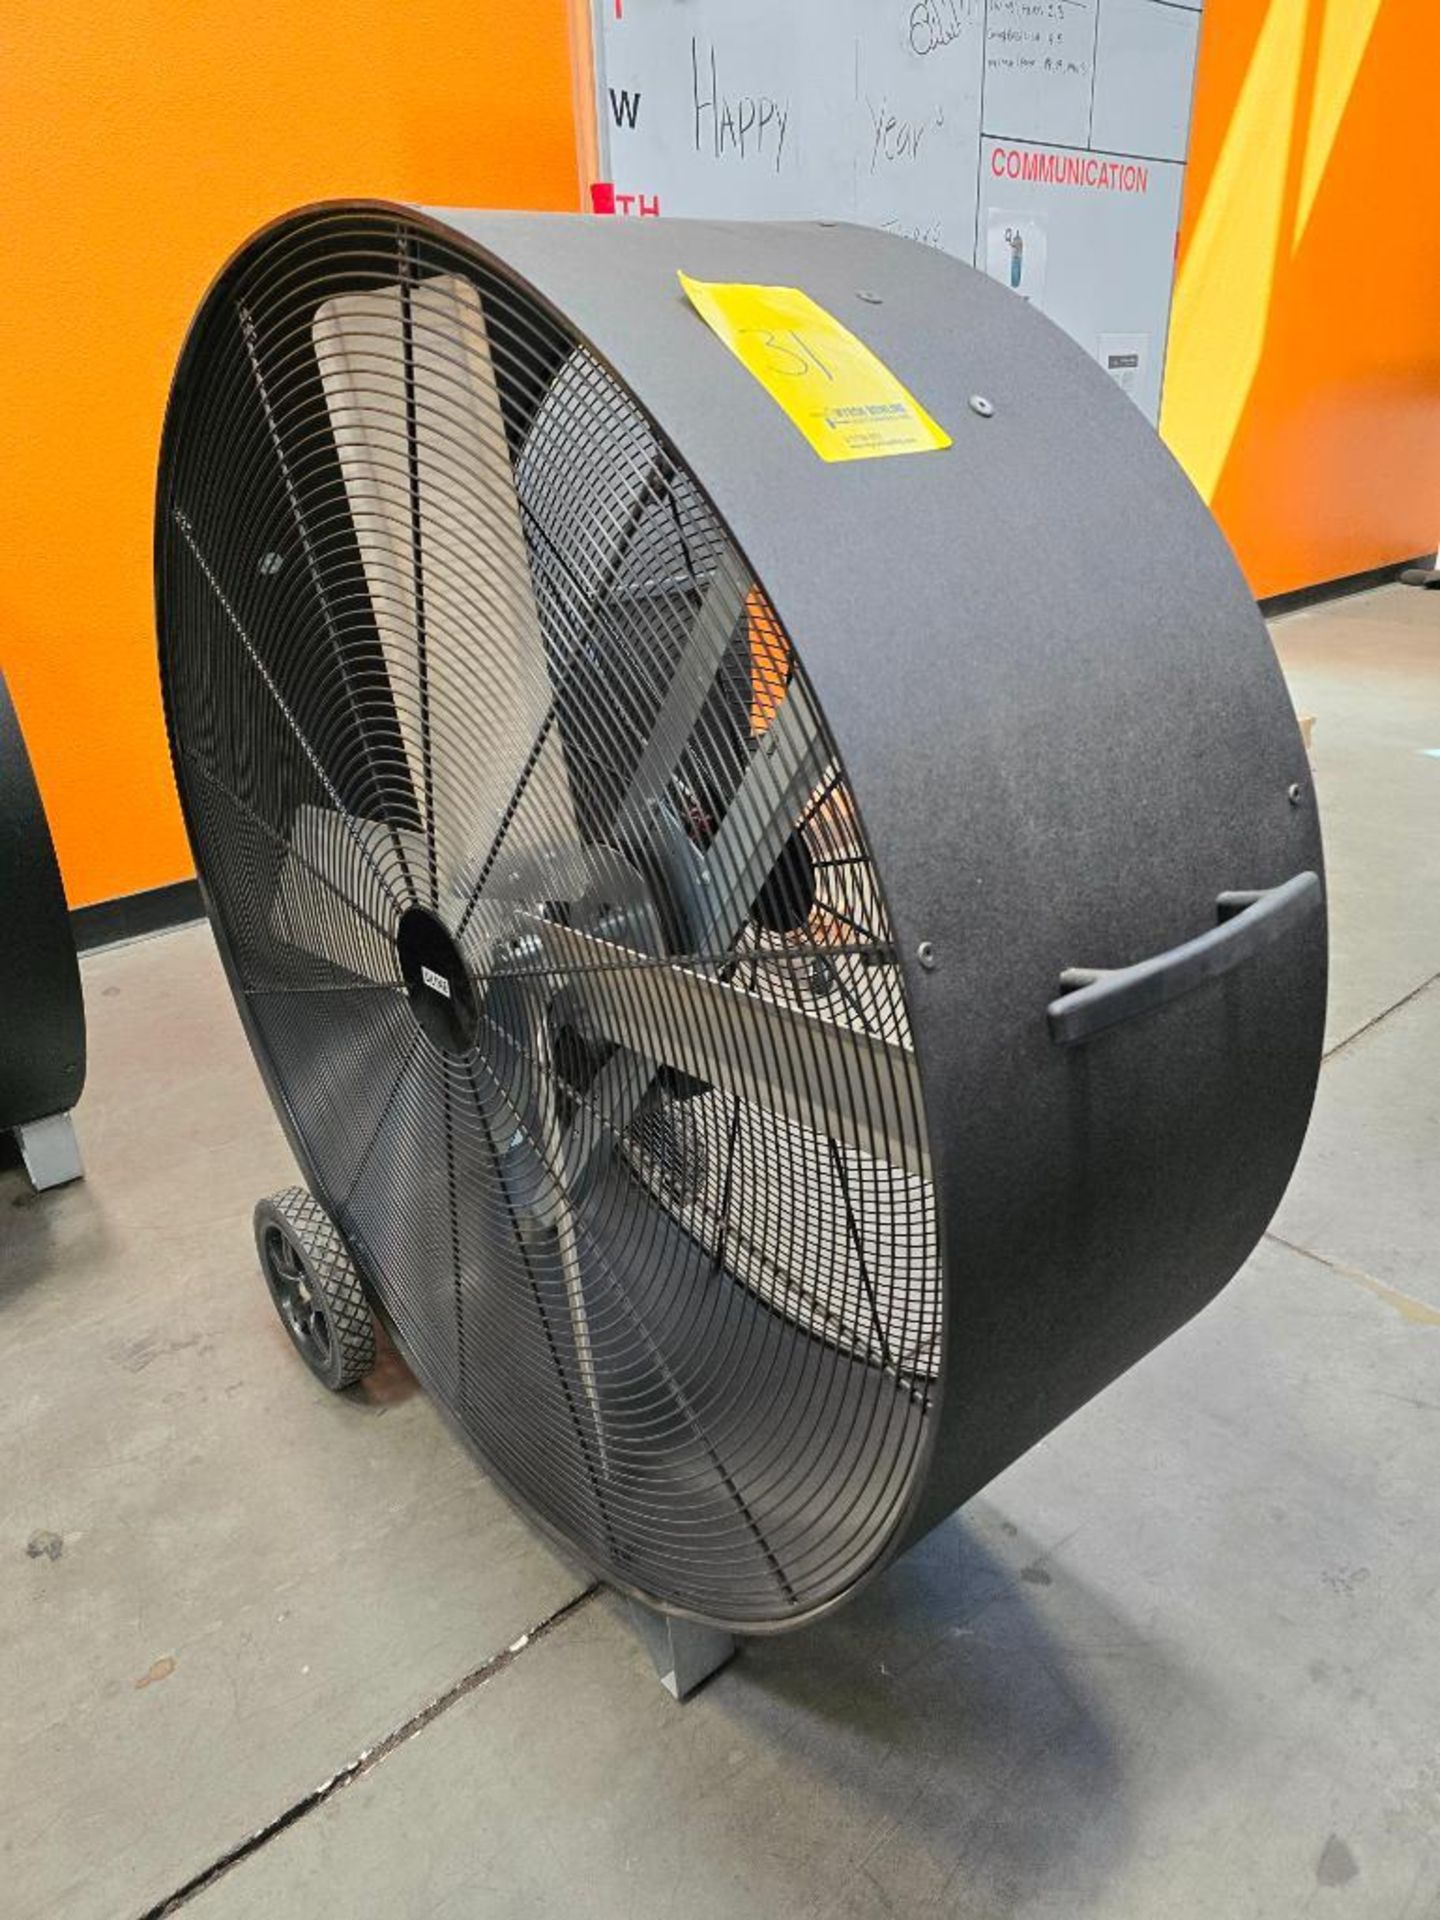 U-Line 42" Floor Barrel Fan ($10 Loading Fee Will Be Added To Buyer's Invoice) - Image 2 of 5